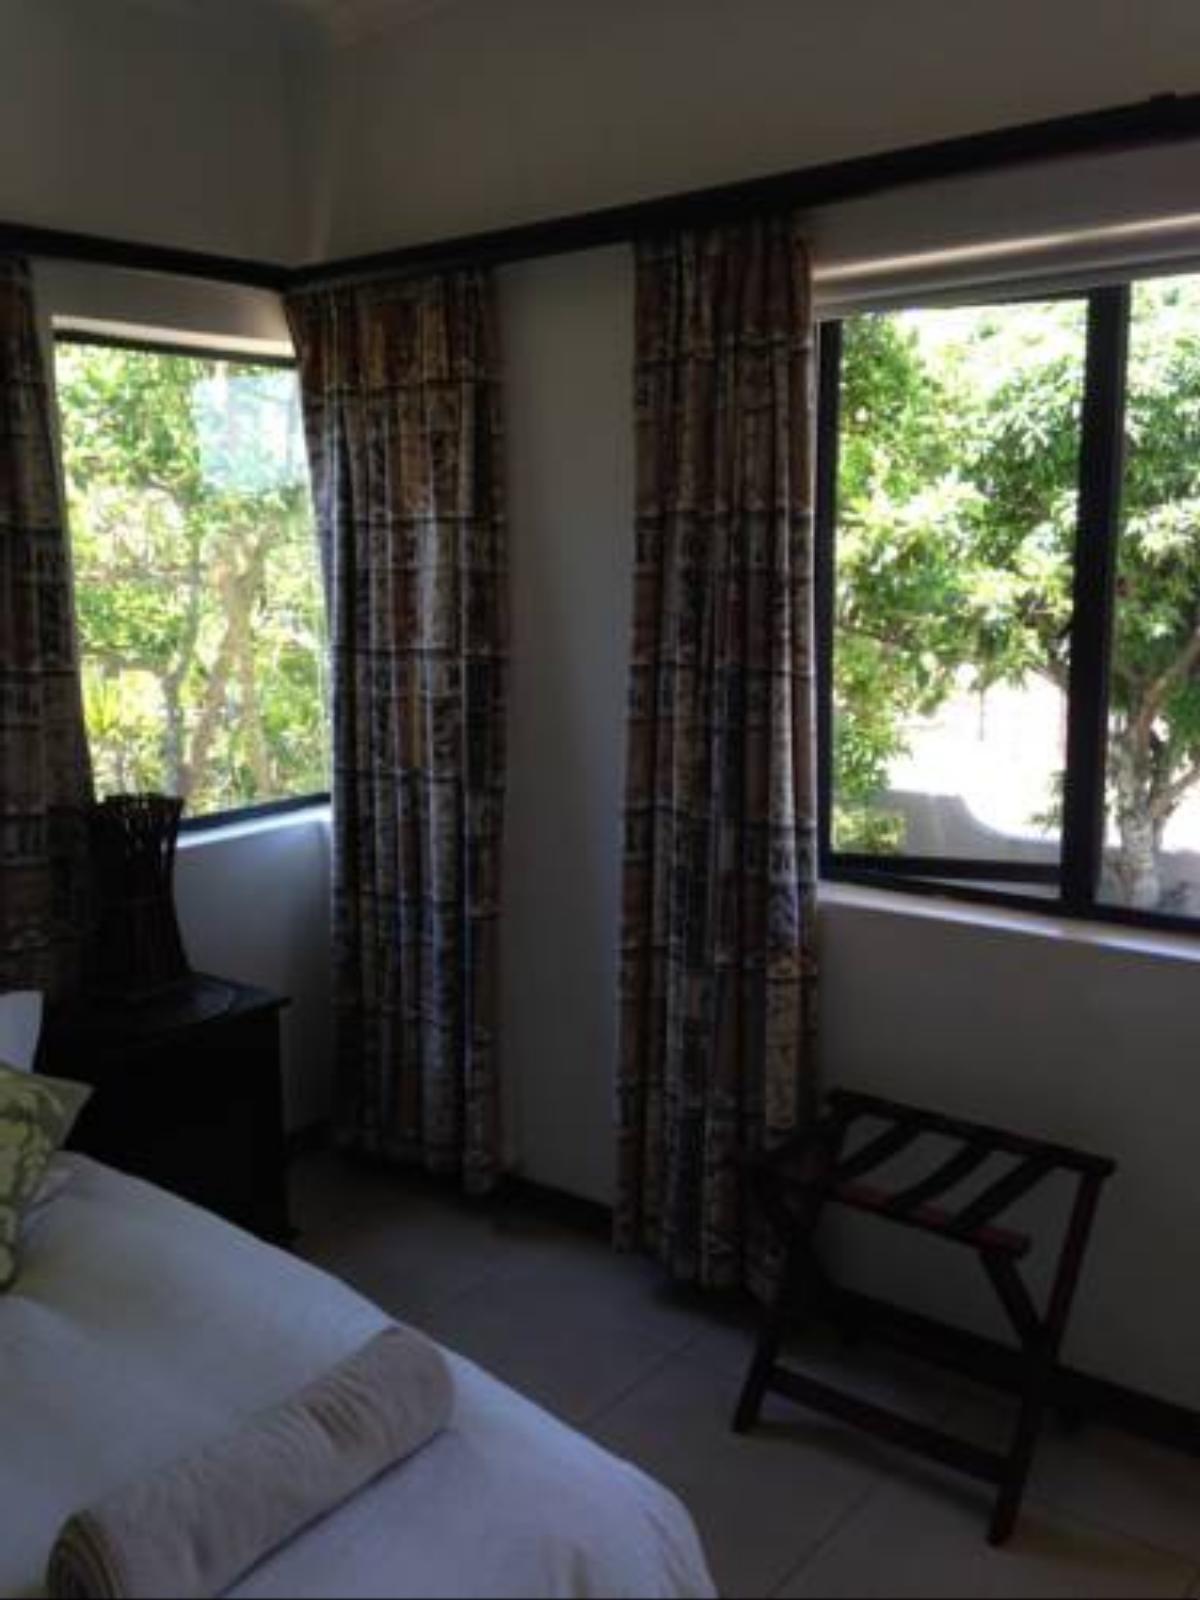 The Getaway Guesthouse Hotel Amanzimtoti South Africa